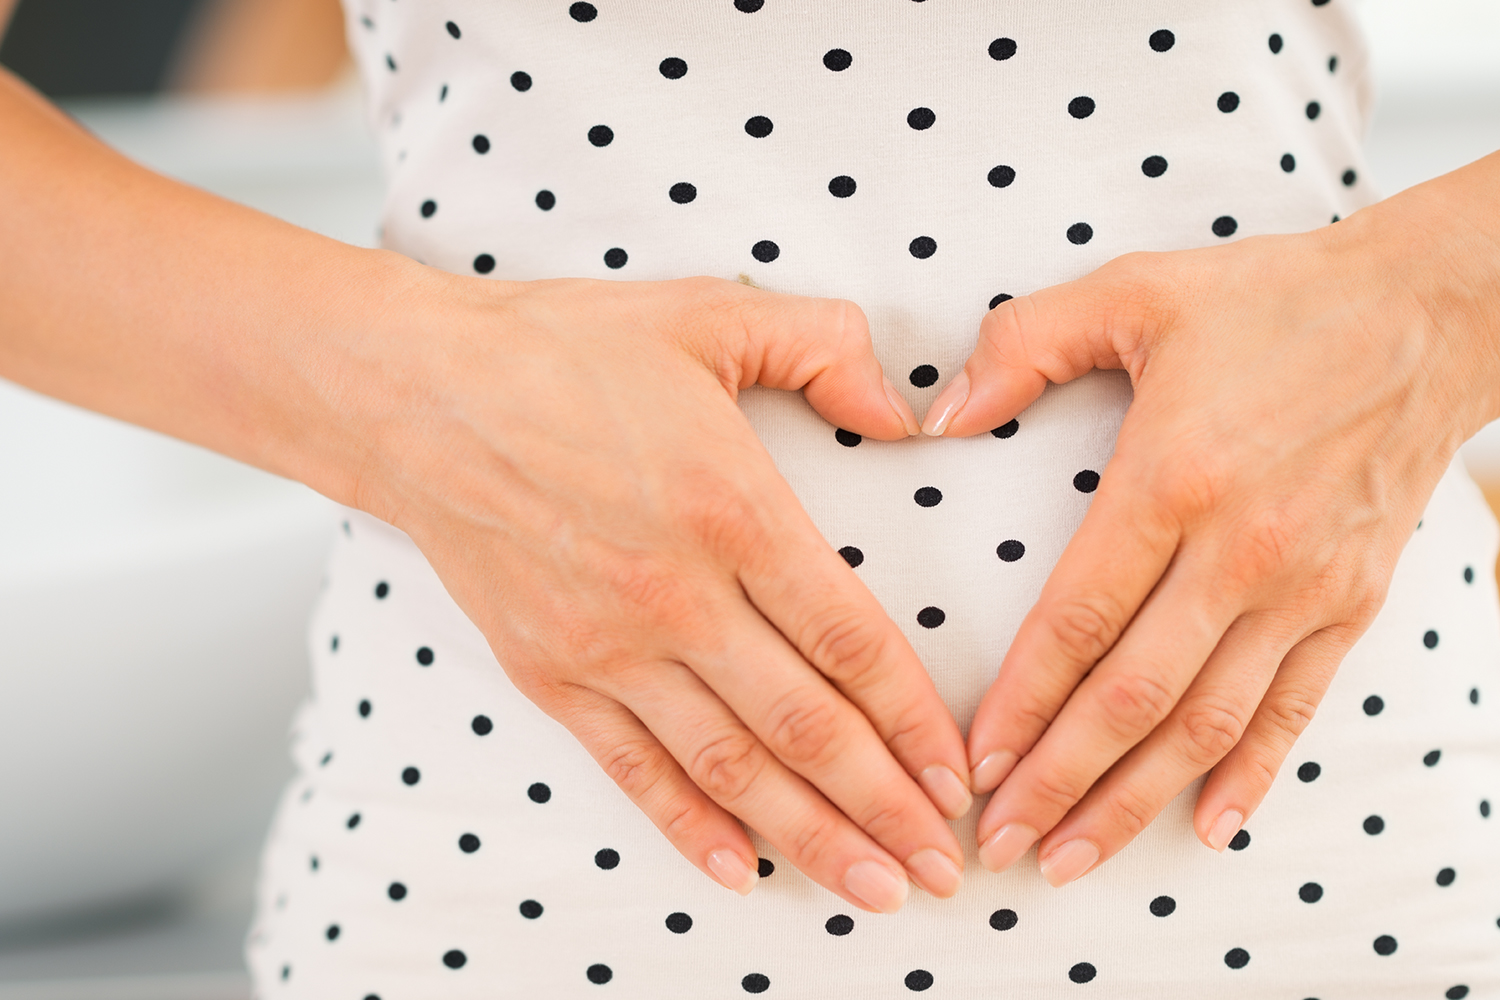 Women Have More Miscarriages Than Babies During Their Lifetime